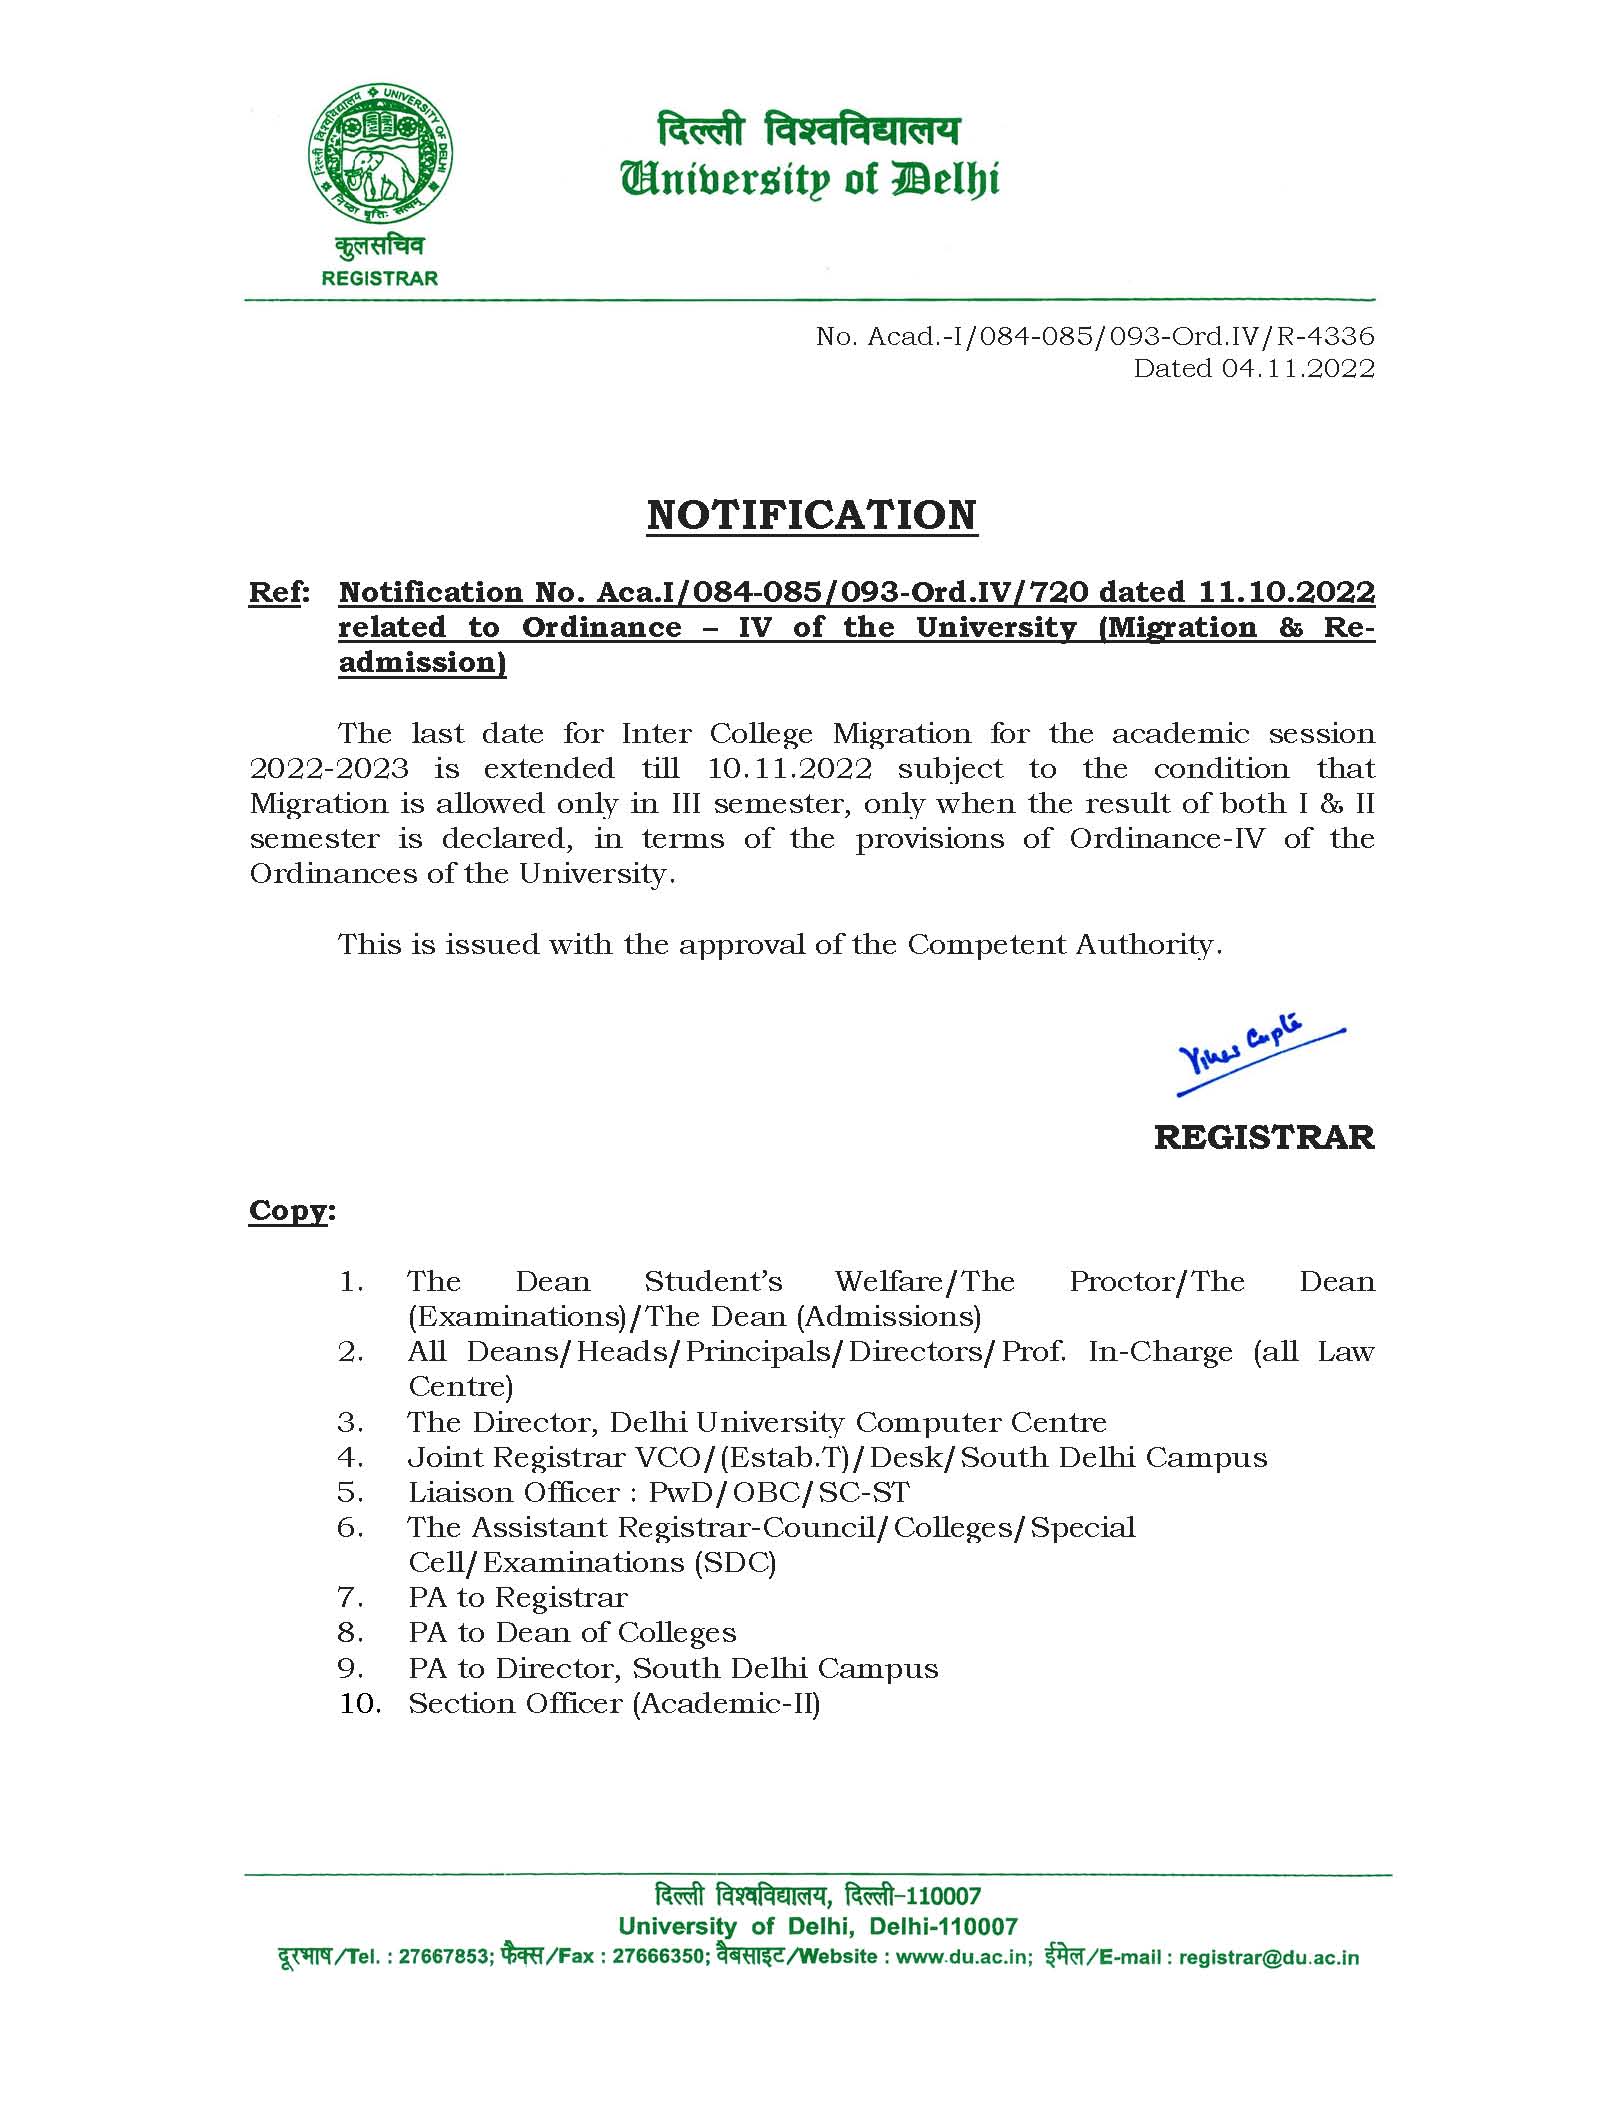 04-11-2022-Notification - Extension of last date for Inter College Migration- DU